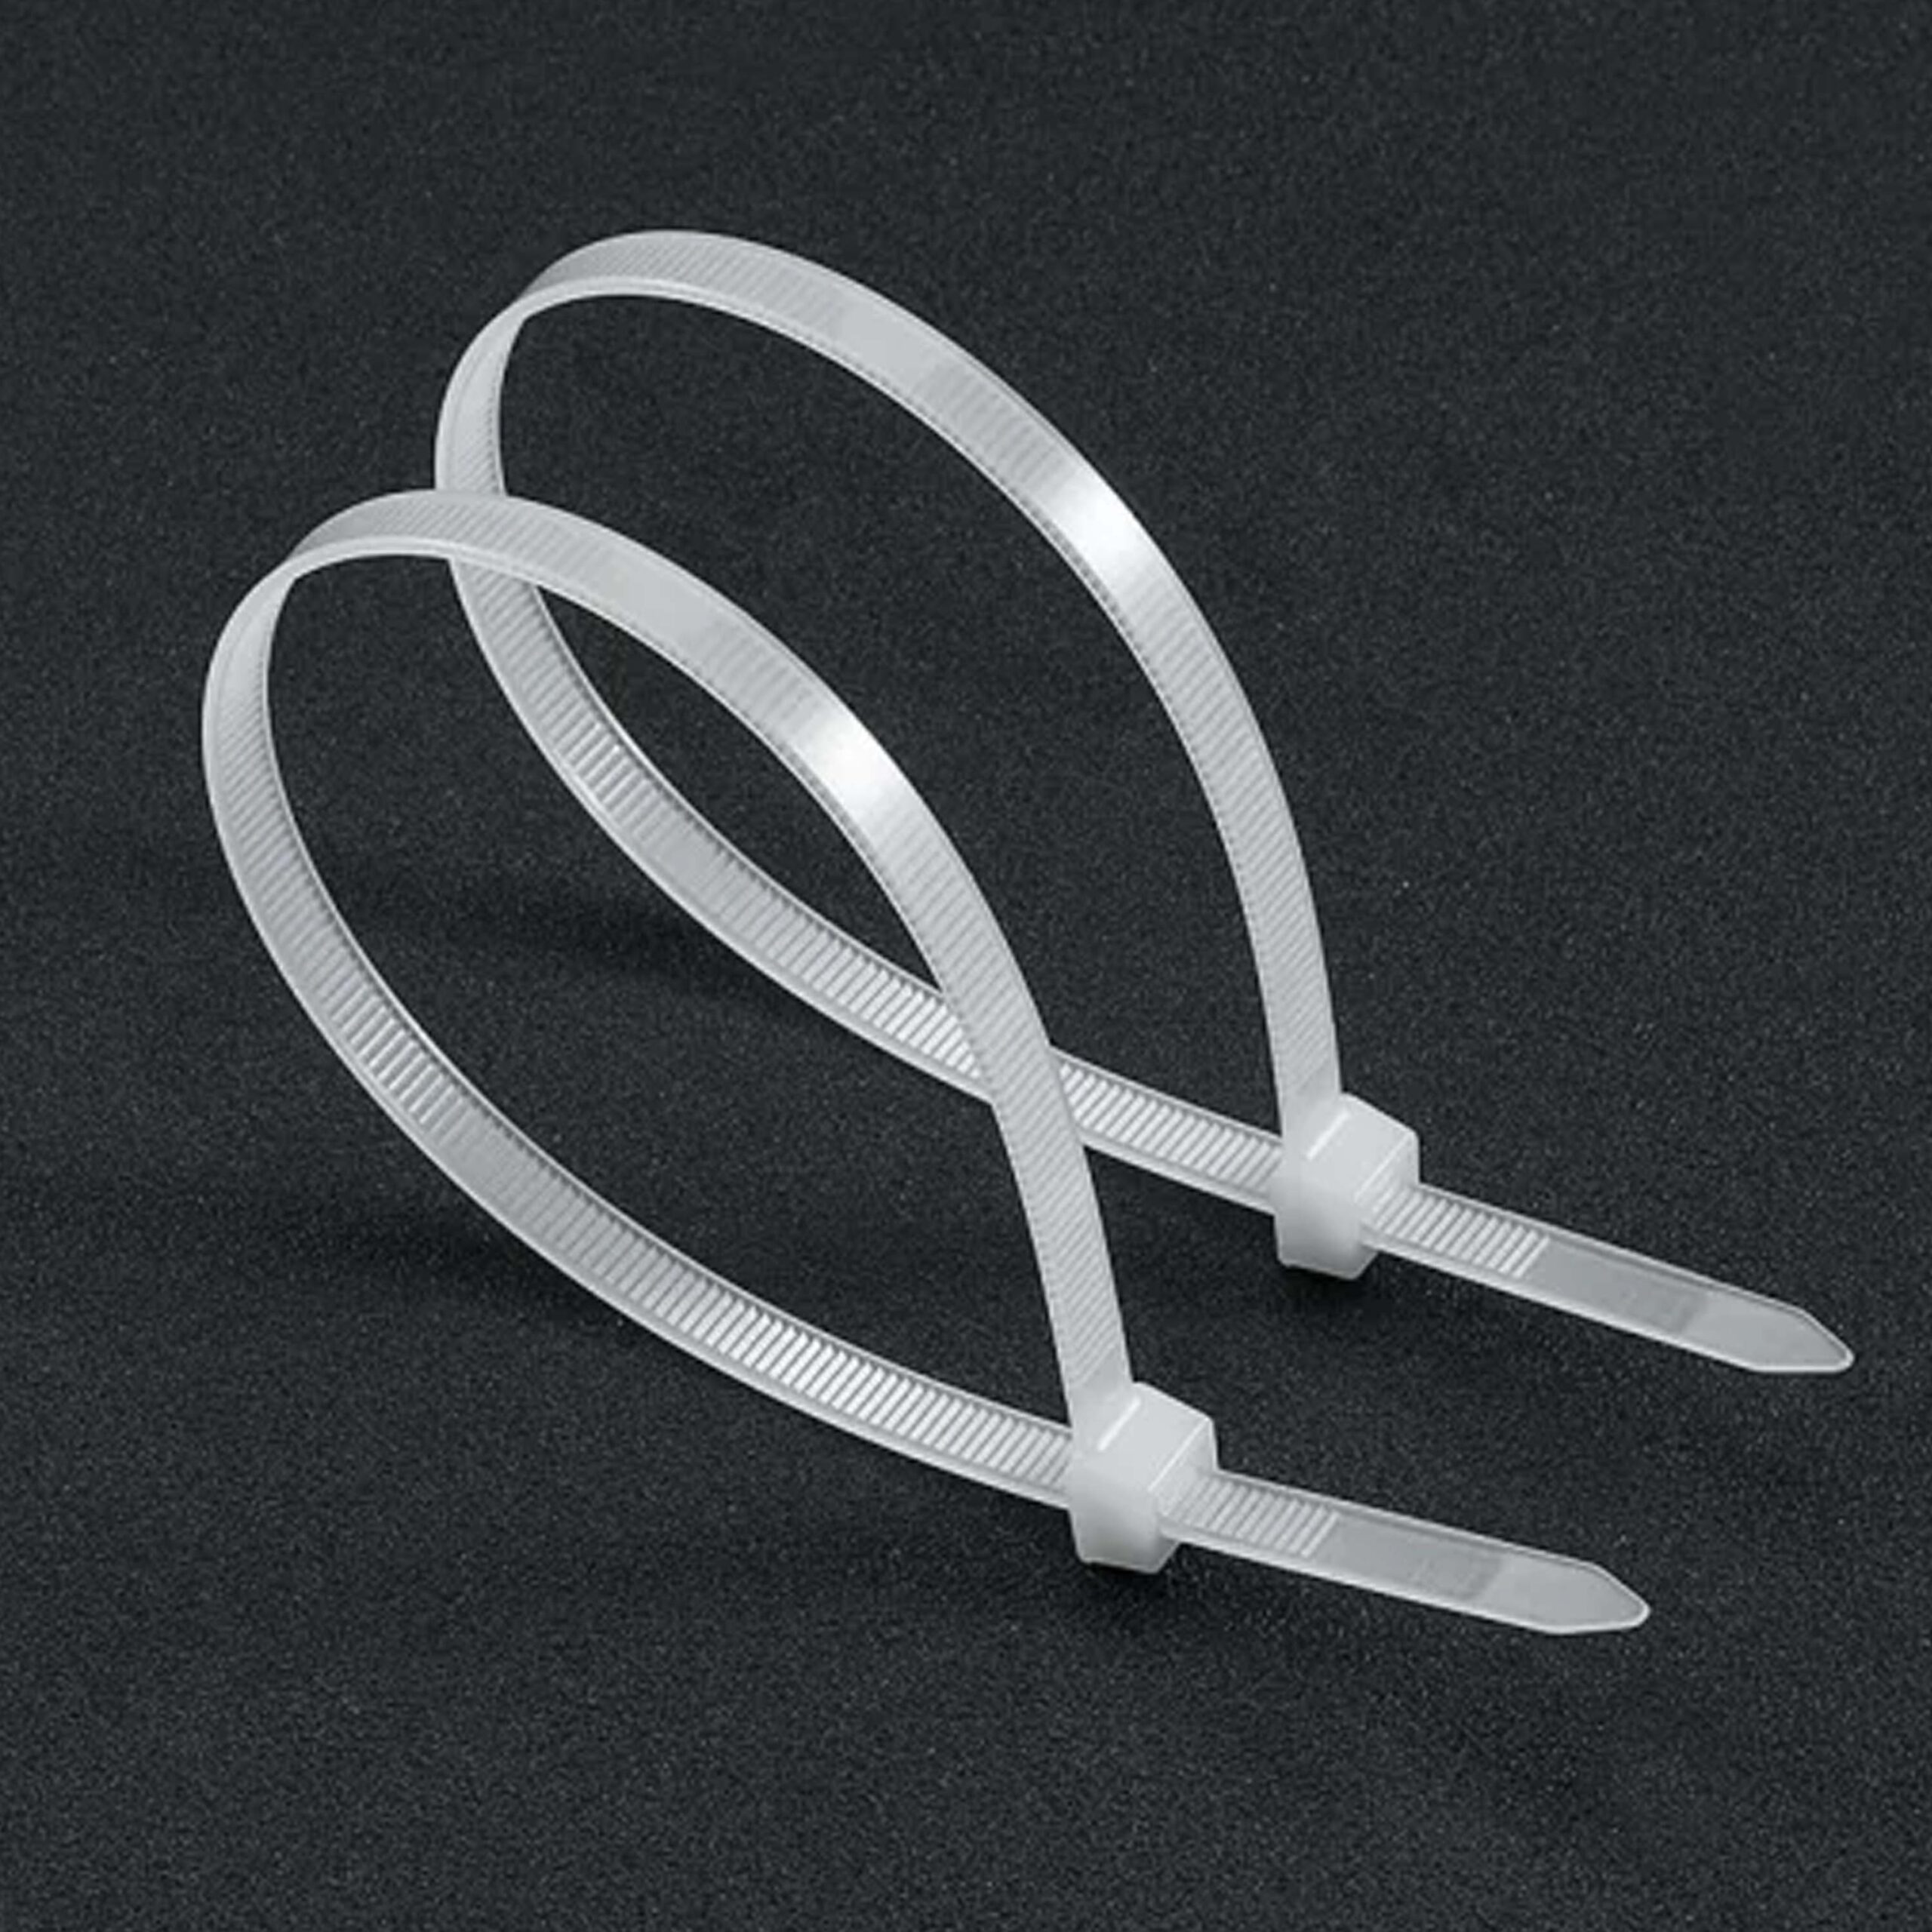 CABLE TIES 80mm
(1x100)